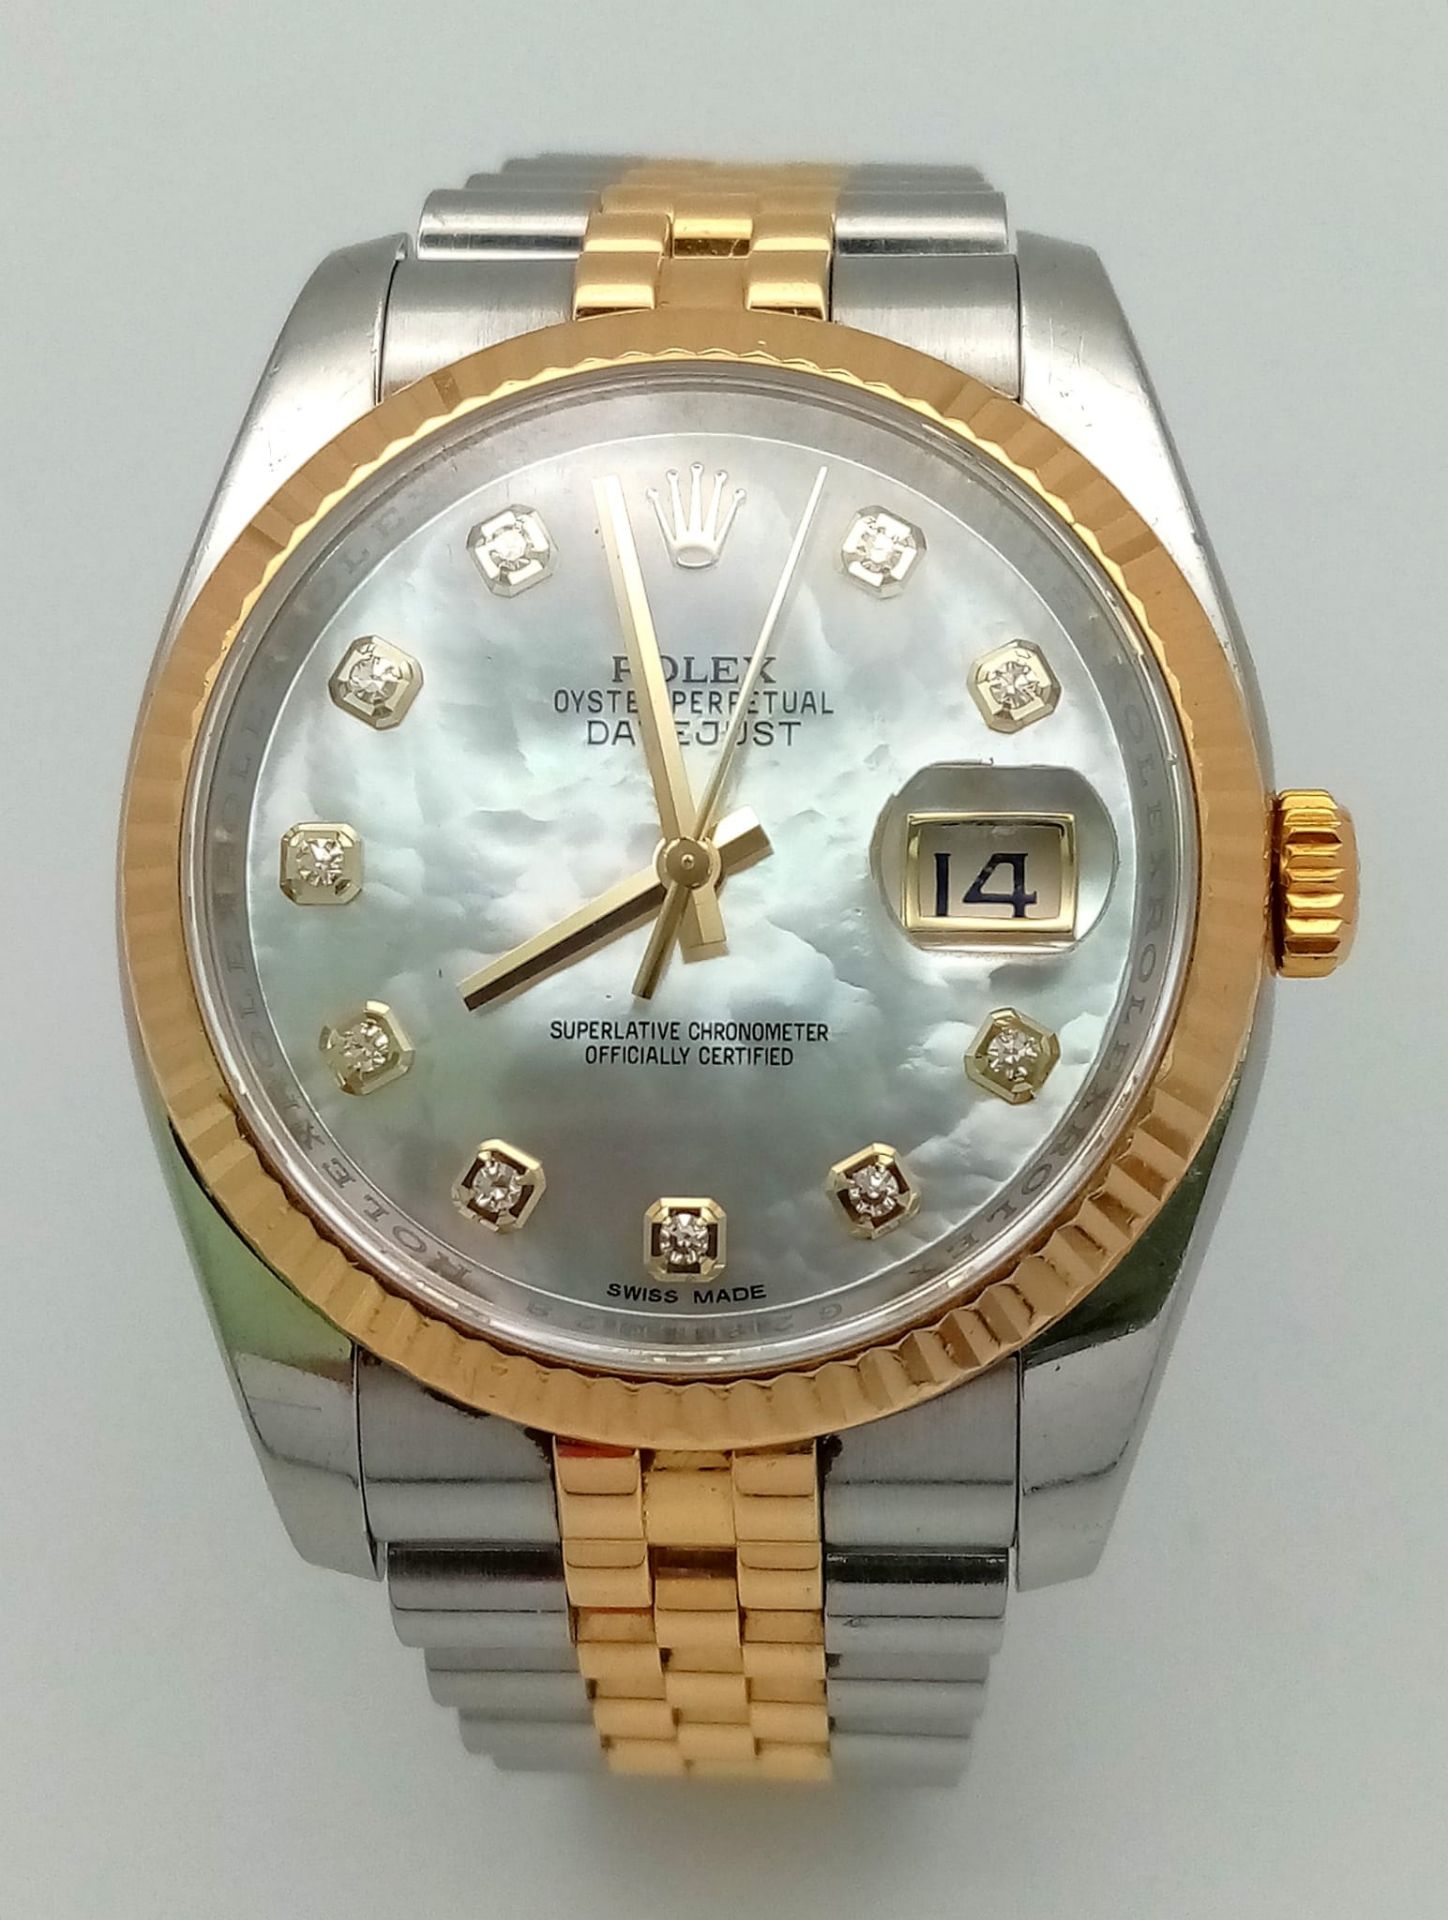 A Rolex Bi-Metal Oyster Perpetual Datejust Ladies Watch. Bi-metal strap and case - 37mm. Mother of